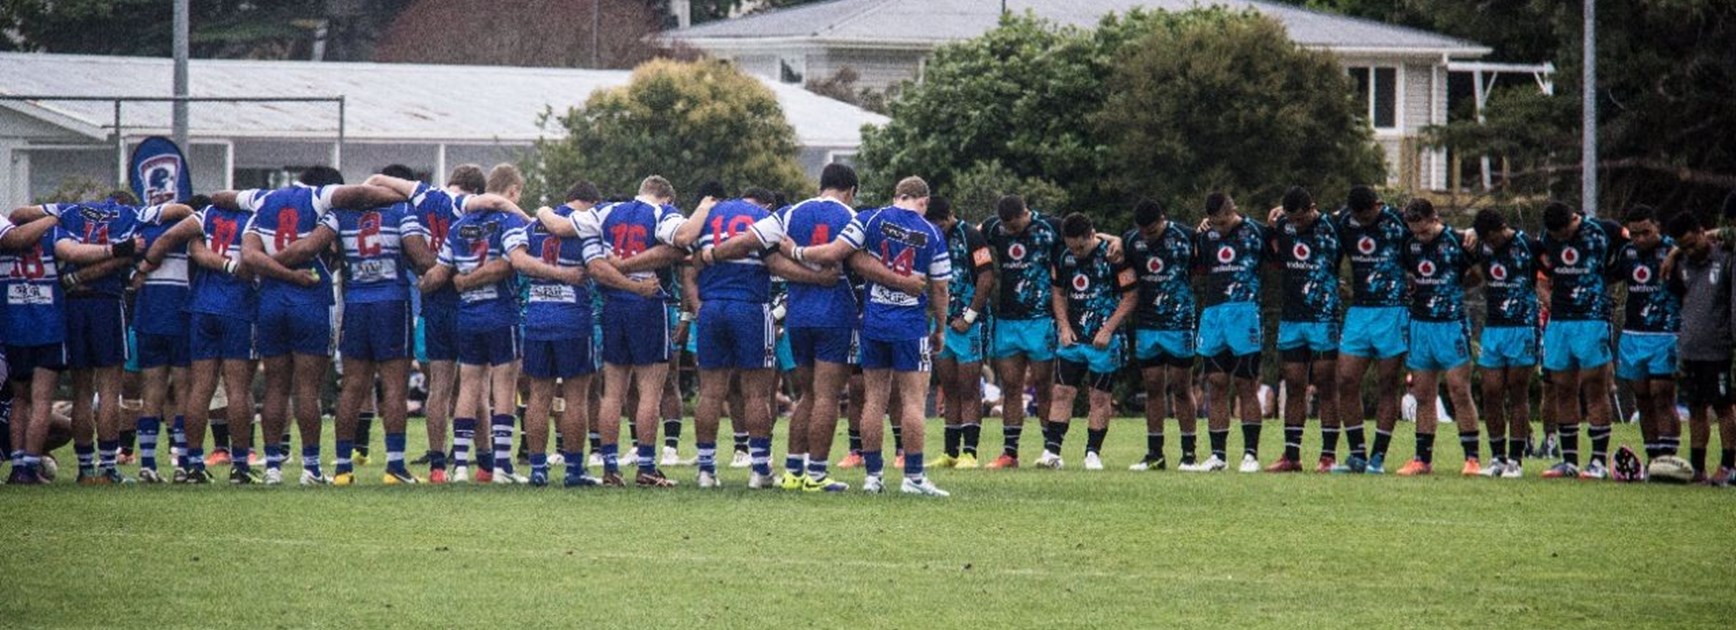 Players from the Vodafone Warriors Academy and Glenora teams observe a moment's silence before their game at the Luke Tipene Celebration Day. Image | www.warriors.kiwi